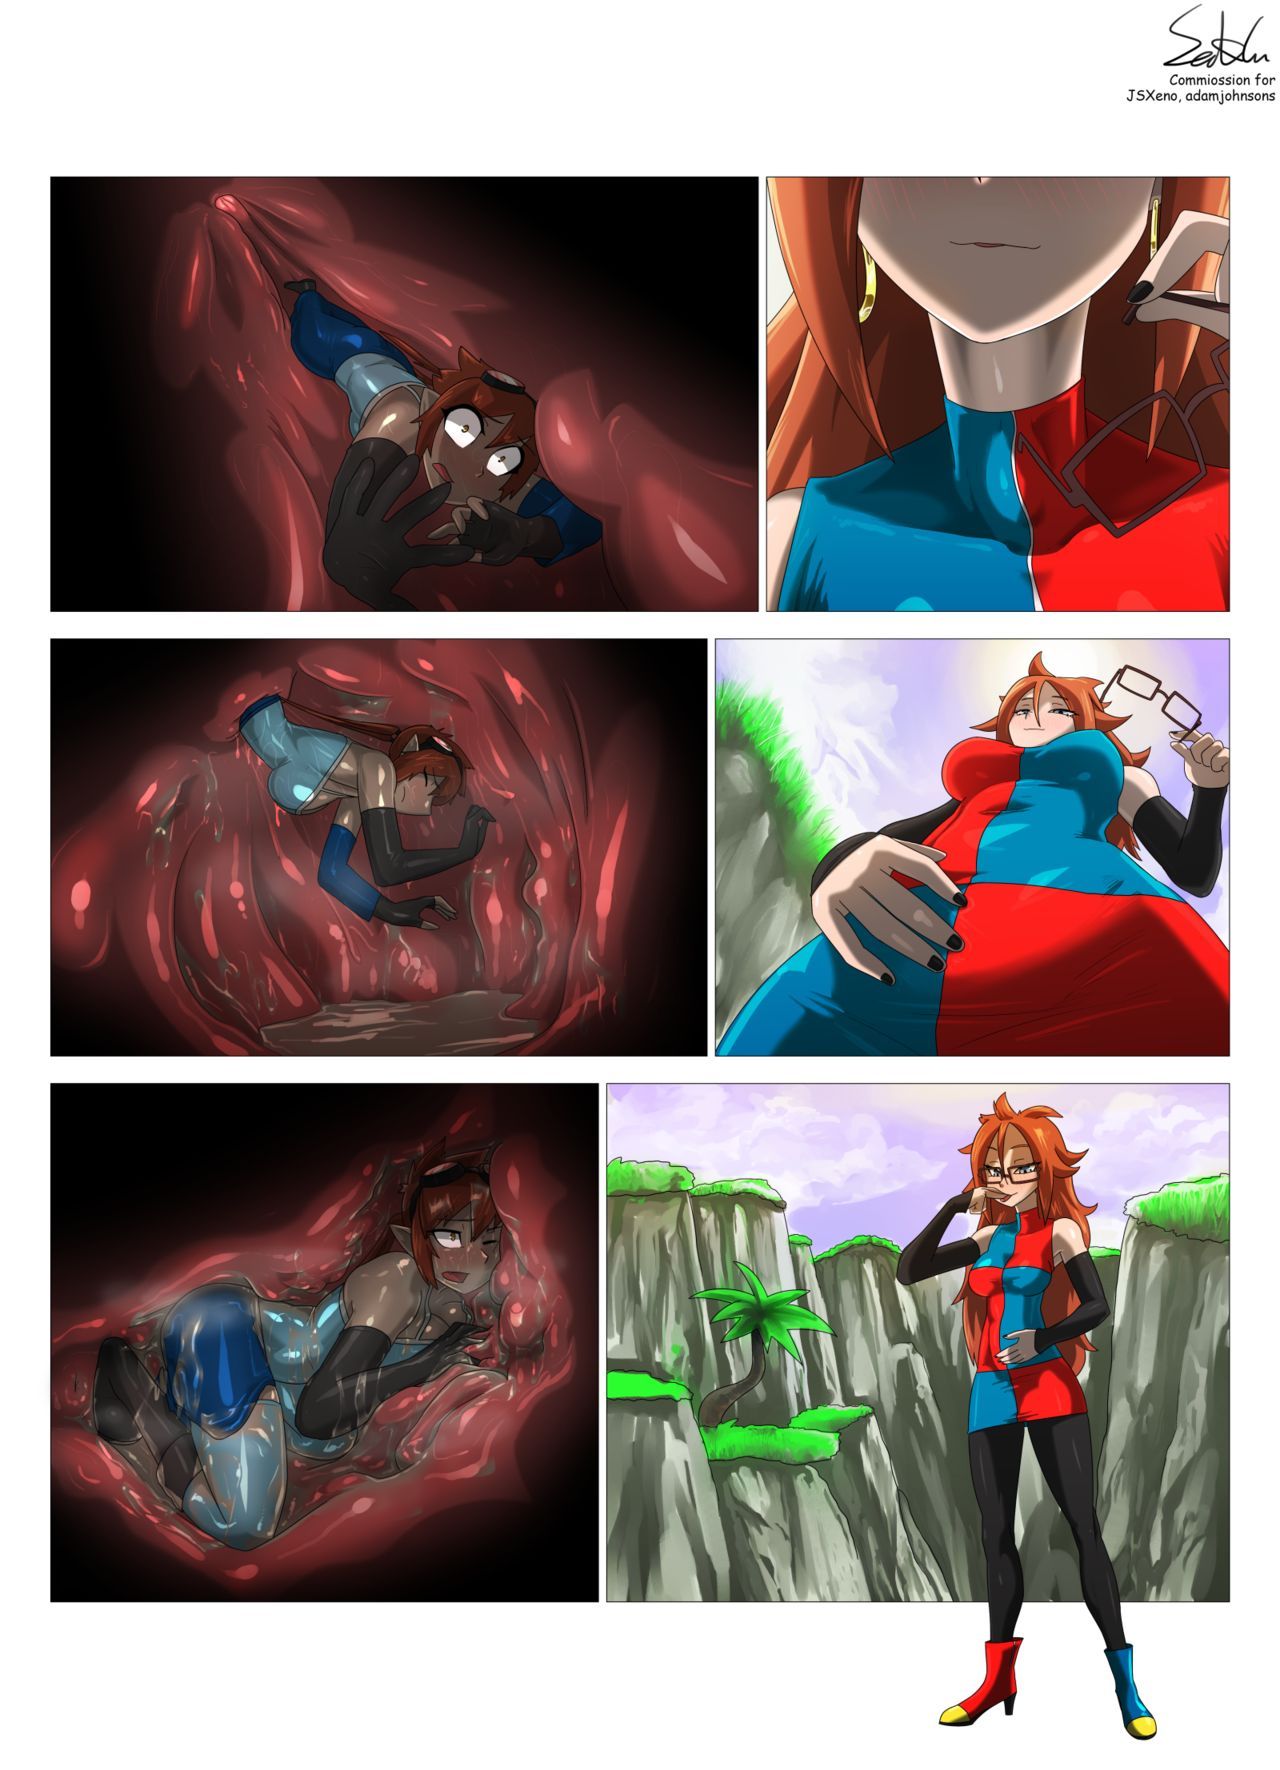 My Favorite Android 21 Pics 12